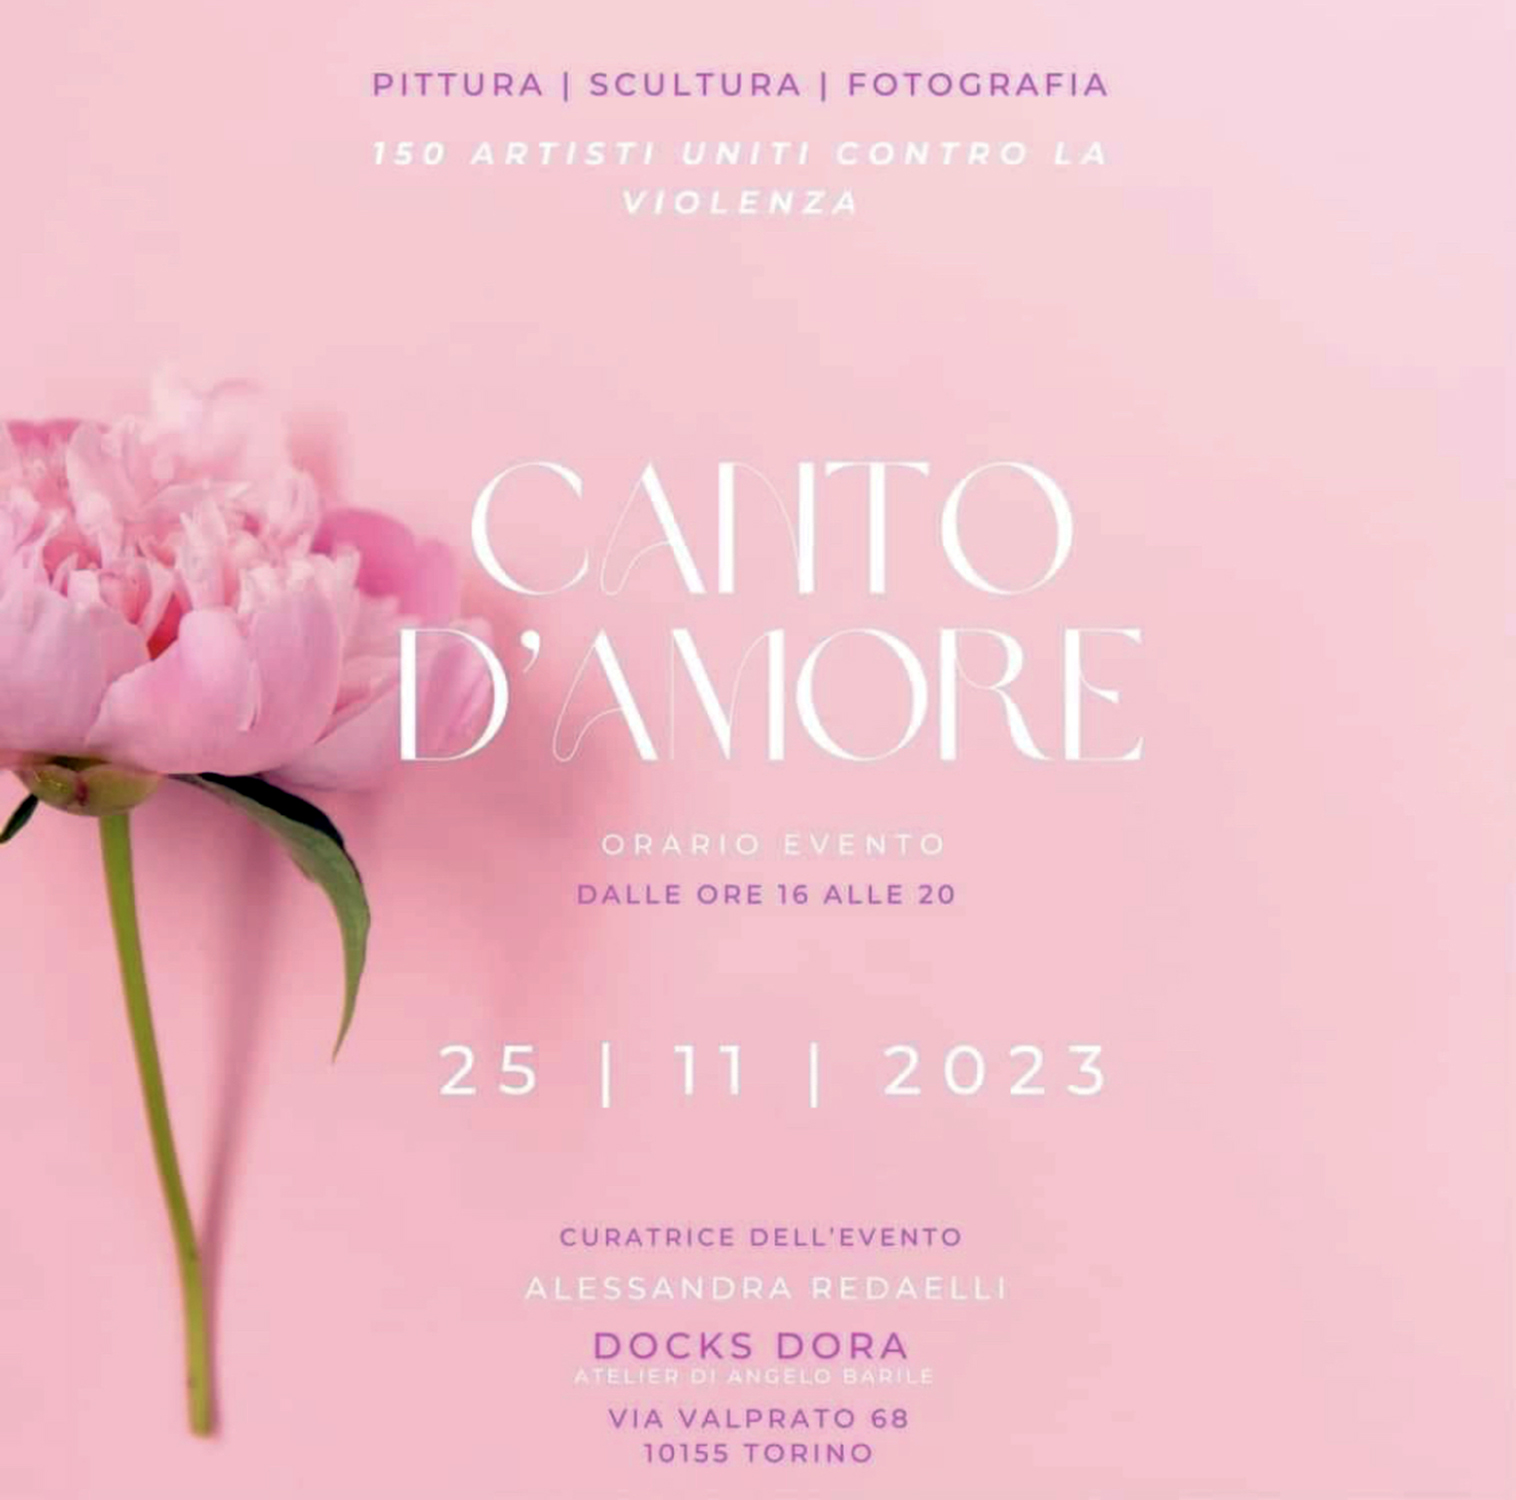 Canto d'Amore exhibition